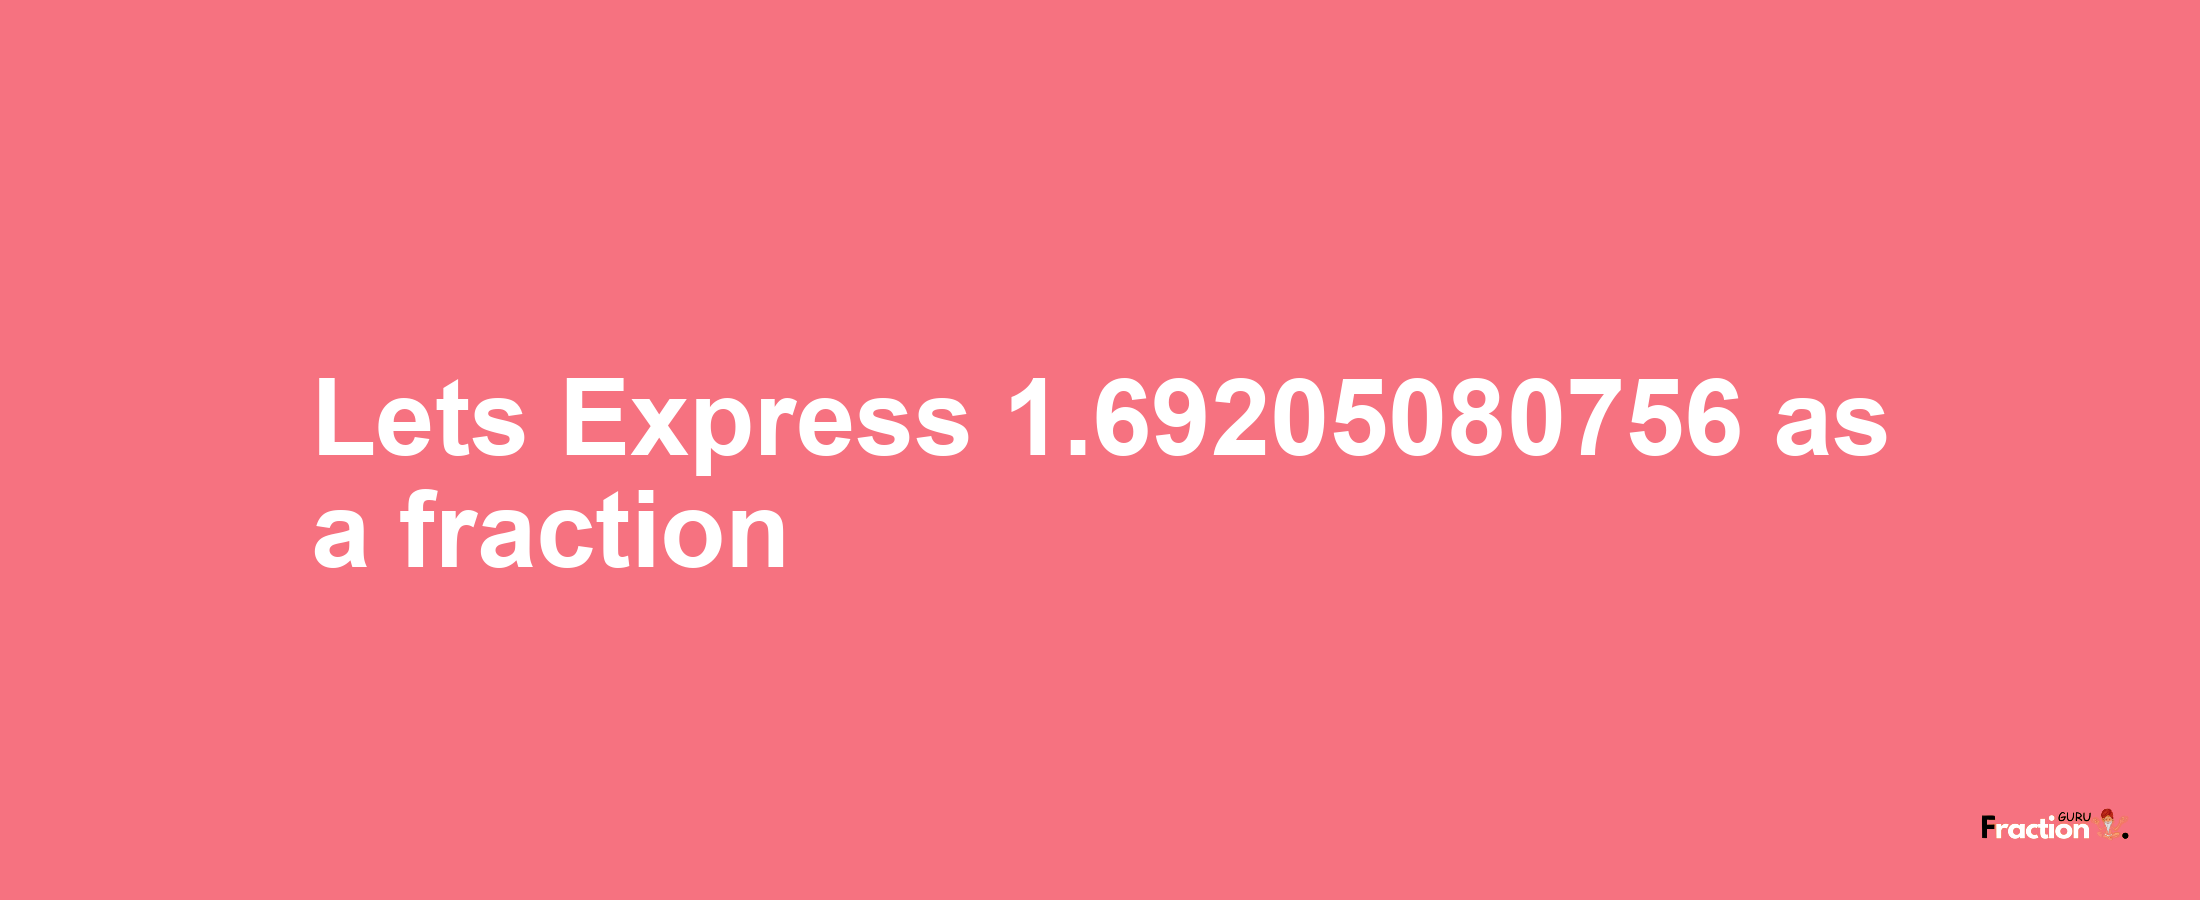 Lets Express 1.69205080756 as afraction